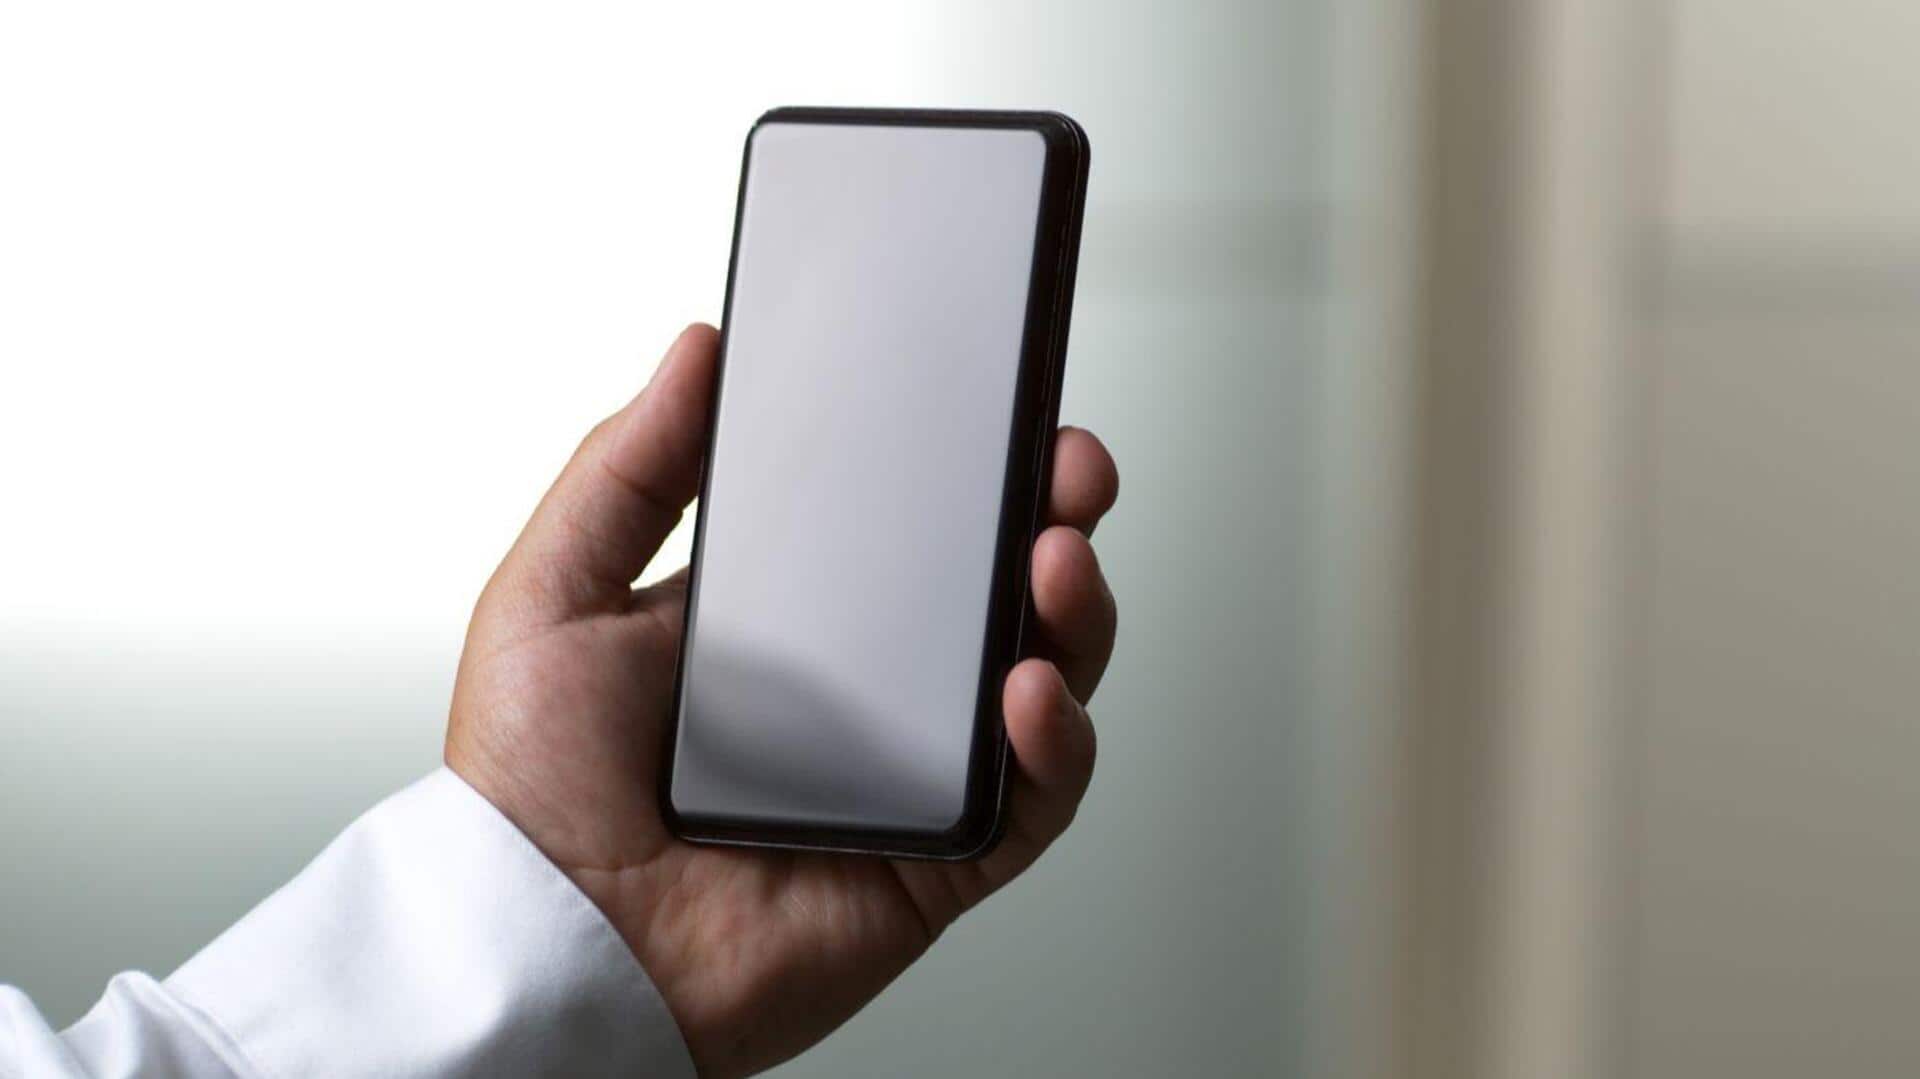 Corning's new glass will protect budget phones from drops, scratches